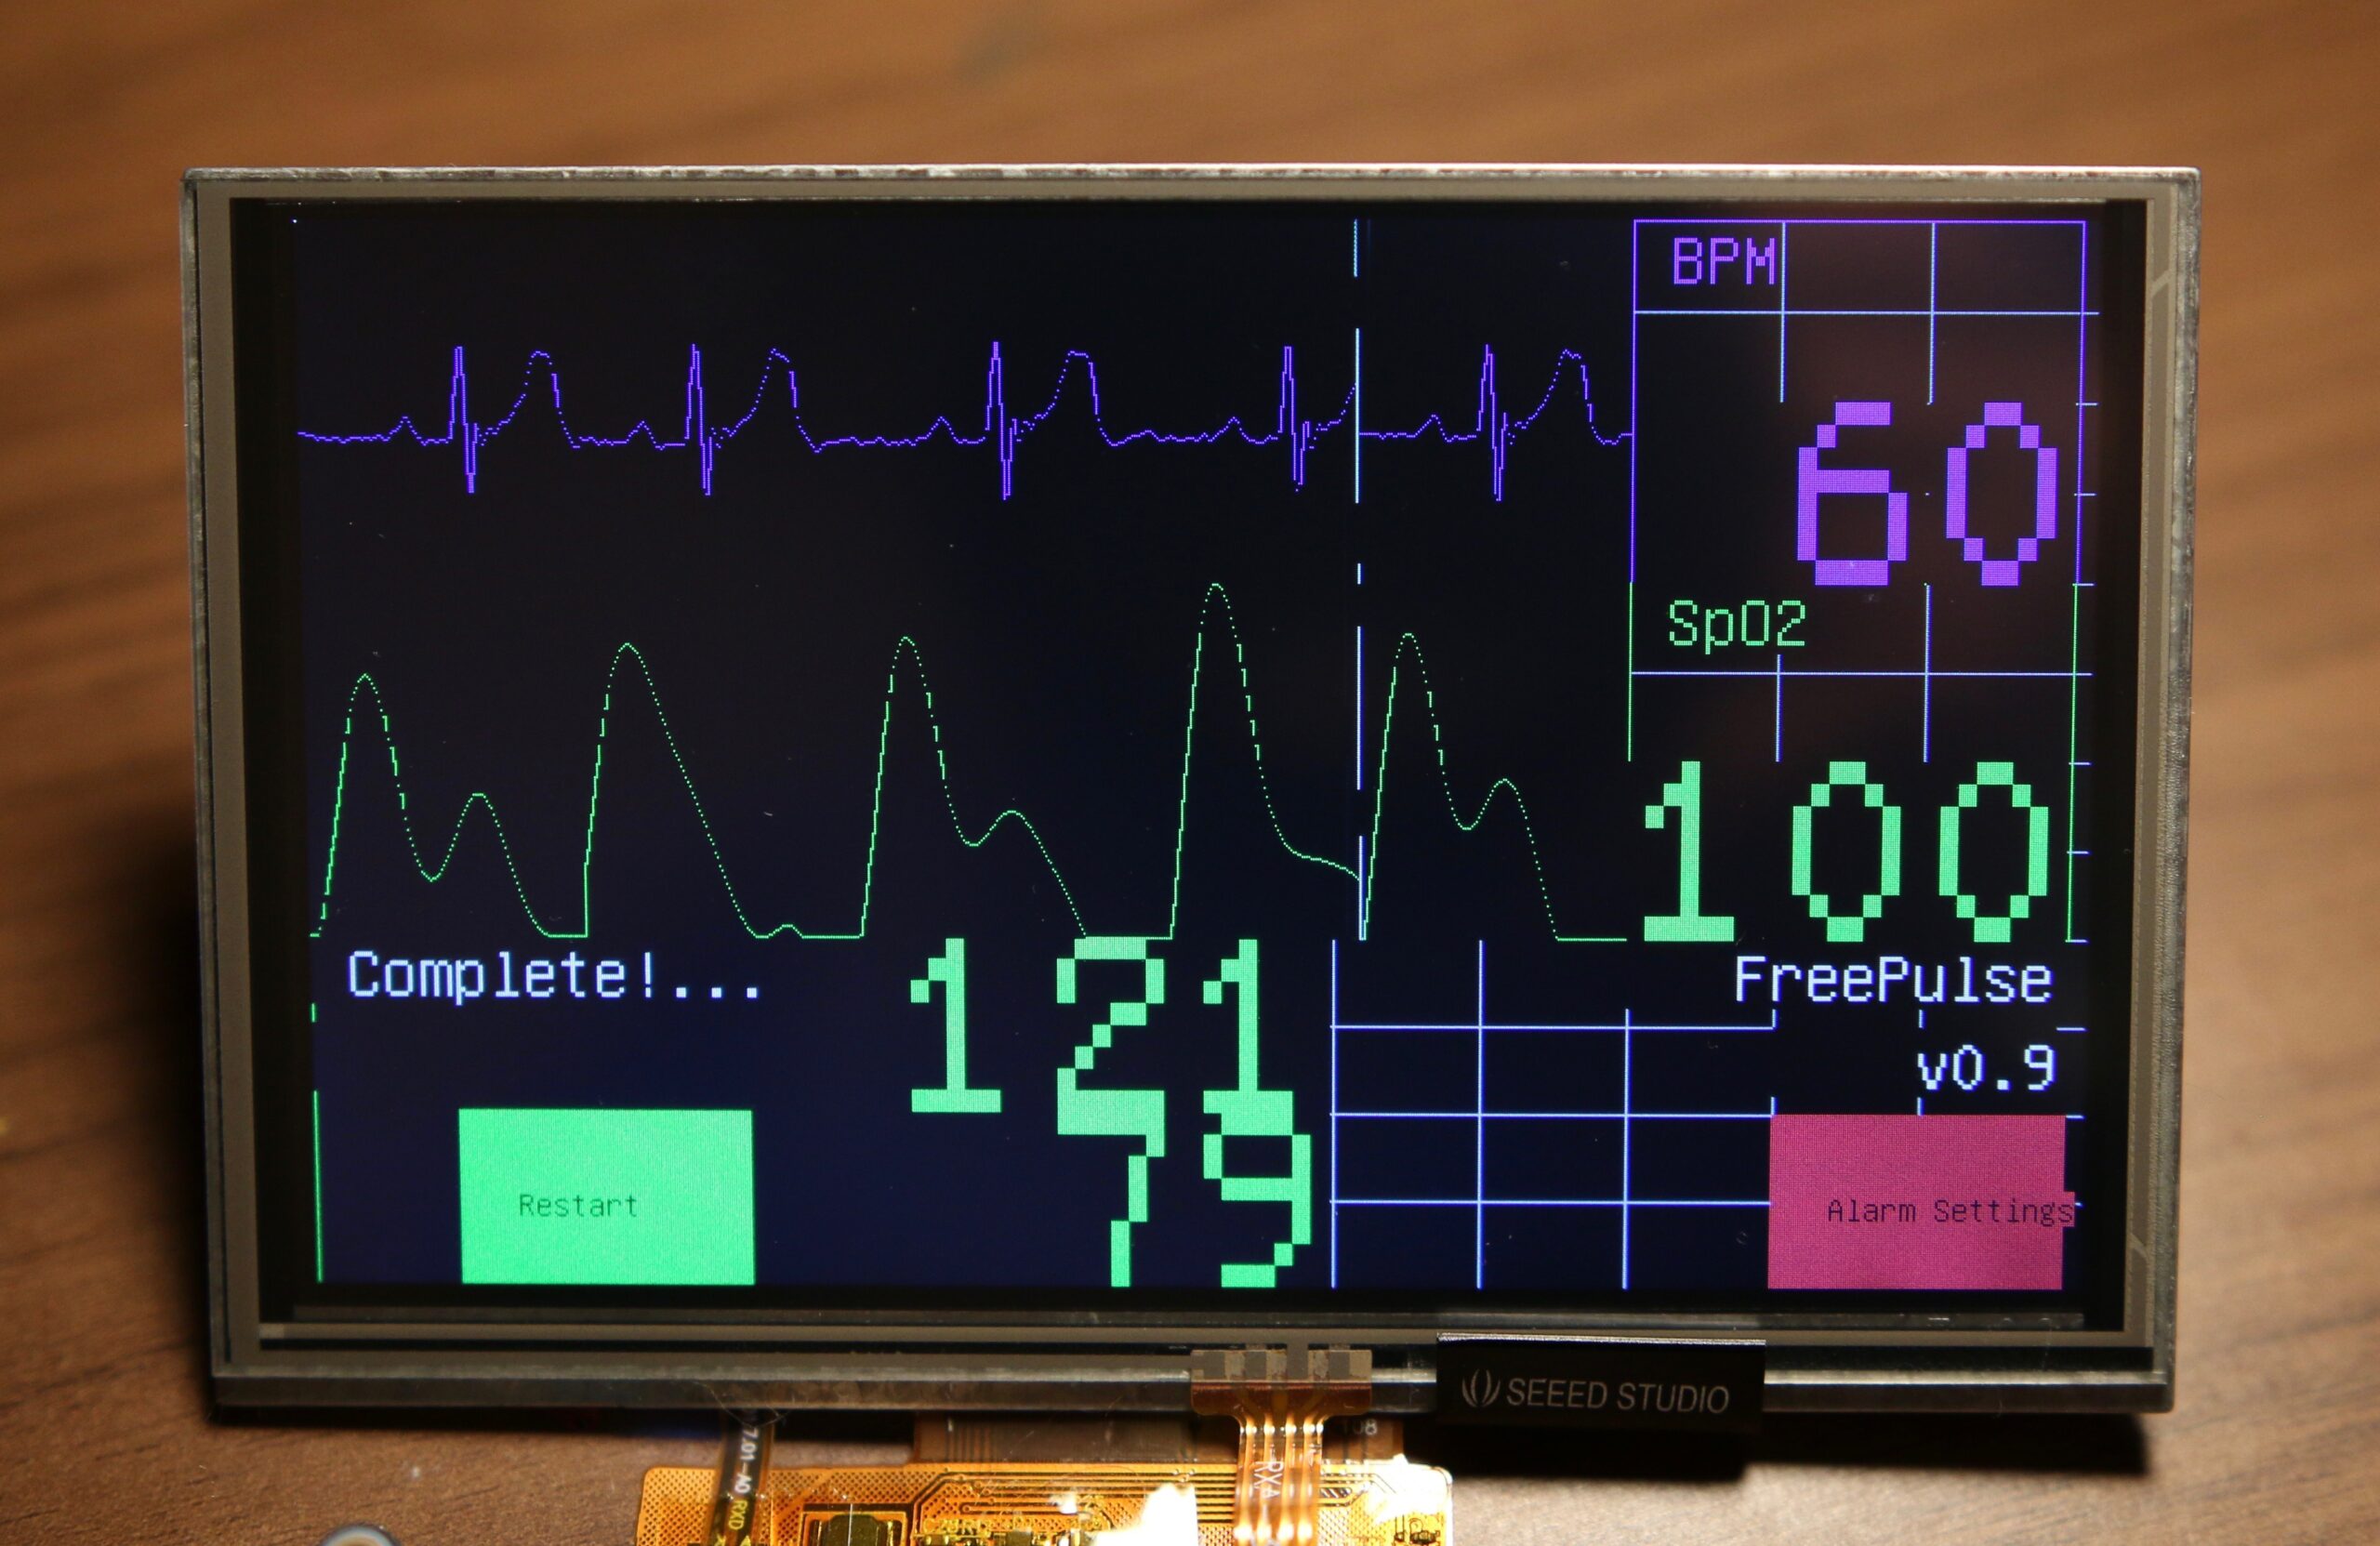 Prototype of FreePulse monitor, small screen that displays heart rate and vitals